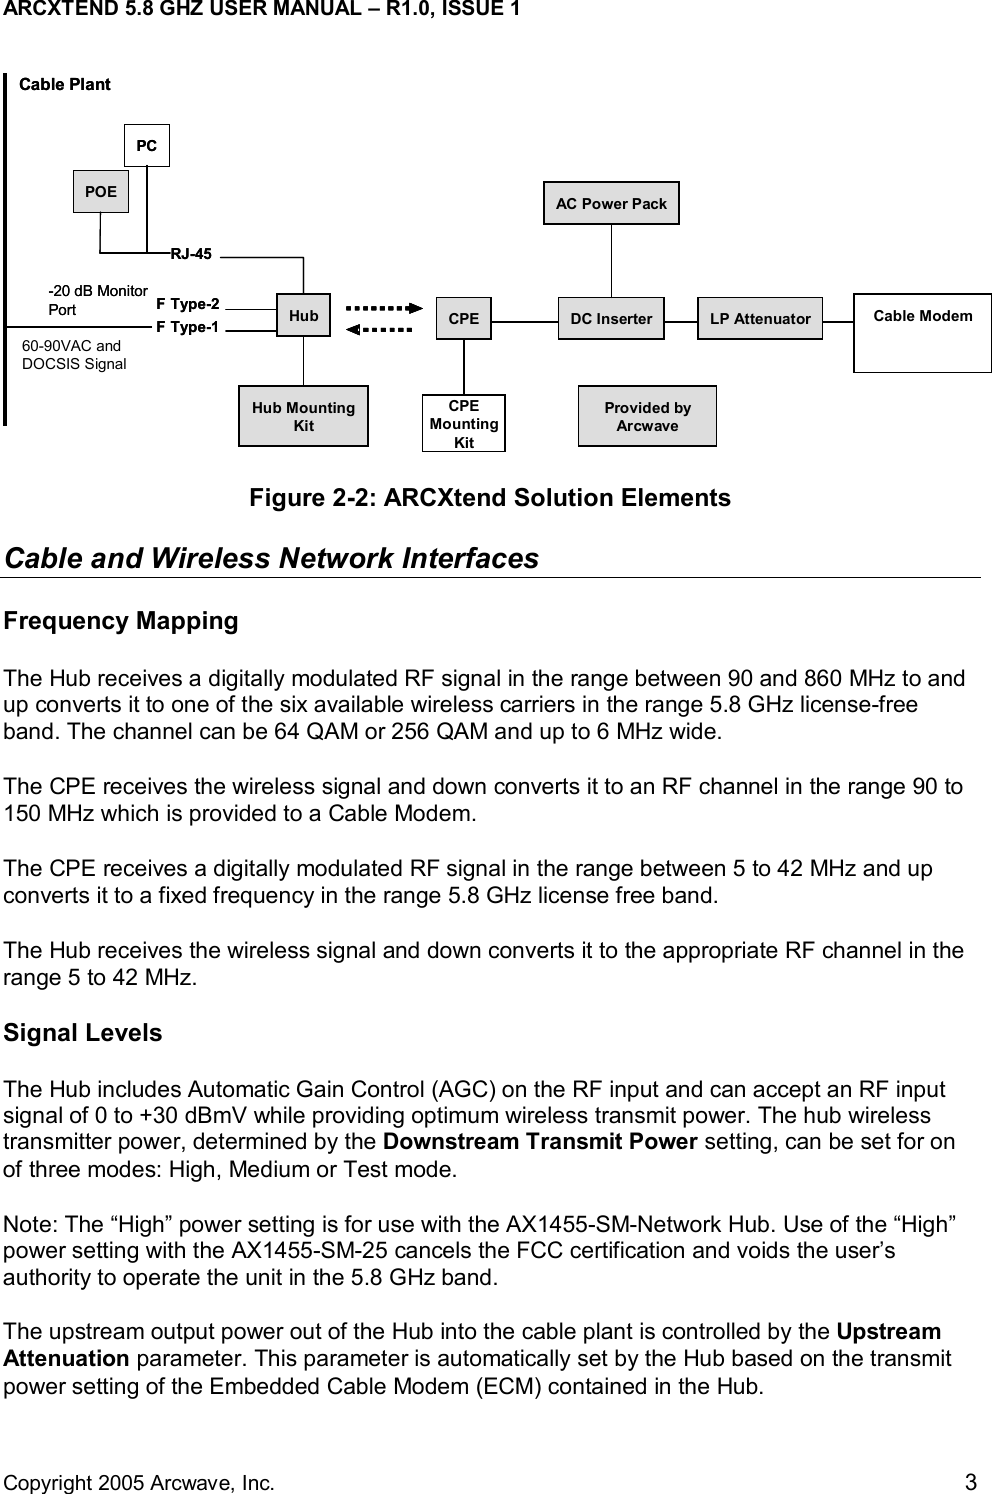 ARCXTEND 5.8 GHZ USER MANUAL – R1.0, ISSUE 1  Copyright 2005 Arcwave, Inc.    3 RJ-45F Type-2F Type-1CPE Mounting KitCable Plant60-90VAC and DOCSIS SignalAC Power PackDC Inserter LP AttenuatorHub Mounting KitHubPCPOE-20 dB Monitor Port CPE Cable ModemProvided by ArcwaveRJ-45F Type-2F Type-1CPE Mounting KitCable Plant60-90VAC and DOCSIS SignalAC Power PackDC Inserter LP AttenuatorHub Mounting KitHubPCPOE-20 dB Monitor Port CPE Cable ModemProvided by Arcwave Figure 2-2: ARCXtend Solution Elements Cable and Wireless Network Interfaces Frequency Mapping The Hub receives a digitally modulated RF signal in the range between 90 and 860 MHz to and up converts it to one of the six available wireless carriers in the range 5.8 GHz license-free band. The channel can be 64 QAM or 256 QAM and up to 6 MHz wide.  The CPE receives the wireless signal and down converts it to an RF channel in the range 90 to 150 MHz which is provided to a Cable Modem.  The CPE receives a digitally modulated RF signal in the range between 5 to 42 MHz and up converts it to a fixed frequency in the range 5.8 GHz license free band.  The Hub receives the wireless signal and down converts it to the appropriate RF channel in the range 5 to 42 MHz. Signal Levels The Hub includes Automatic Gain Control (AGC) on the RF input and can accept an RF input signal of 0 to +30 dBmV while providing optimum wireless transmit power. The hub wireless transmitter power, determined by the Downstream Transmit Power setting, can be set for on of three modes: High, Medium or Test mode.  Note: The “High” power setting is for use with the AX1455-SM-Network Hub. Use of the “High” power setting with the AX1455-SM-25 cancels the FCC certification and voids the user’s authority to operate the unit in the 5.8 GHz band.  The upstream output power out of the Hub into the cable plant is controlled by the Upstream Attenuation parameter. This parameter is automatically set by the Hub based on the transmit power setting of the Embedded Cable Modem (ECM) contained in the Hub.  